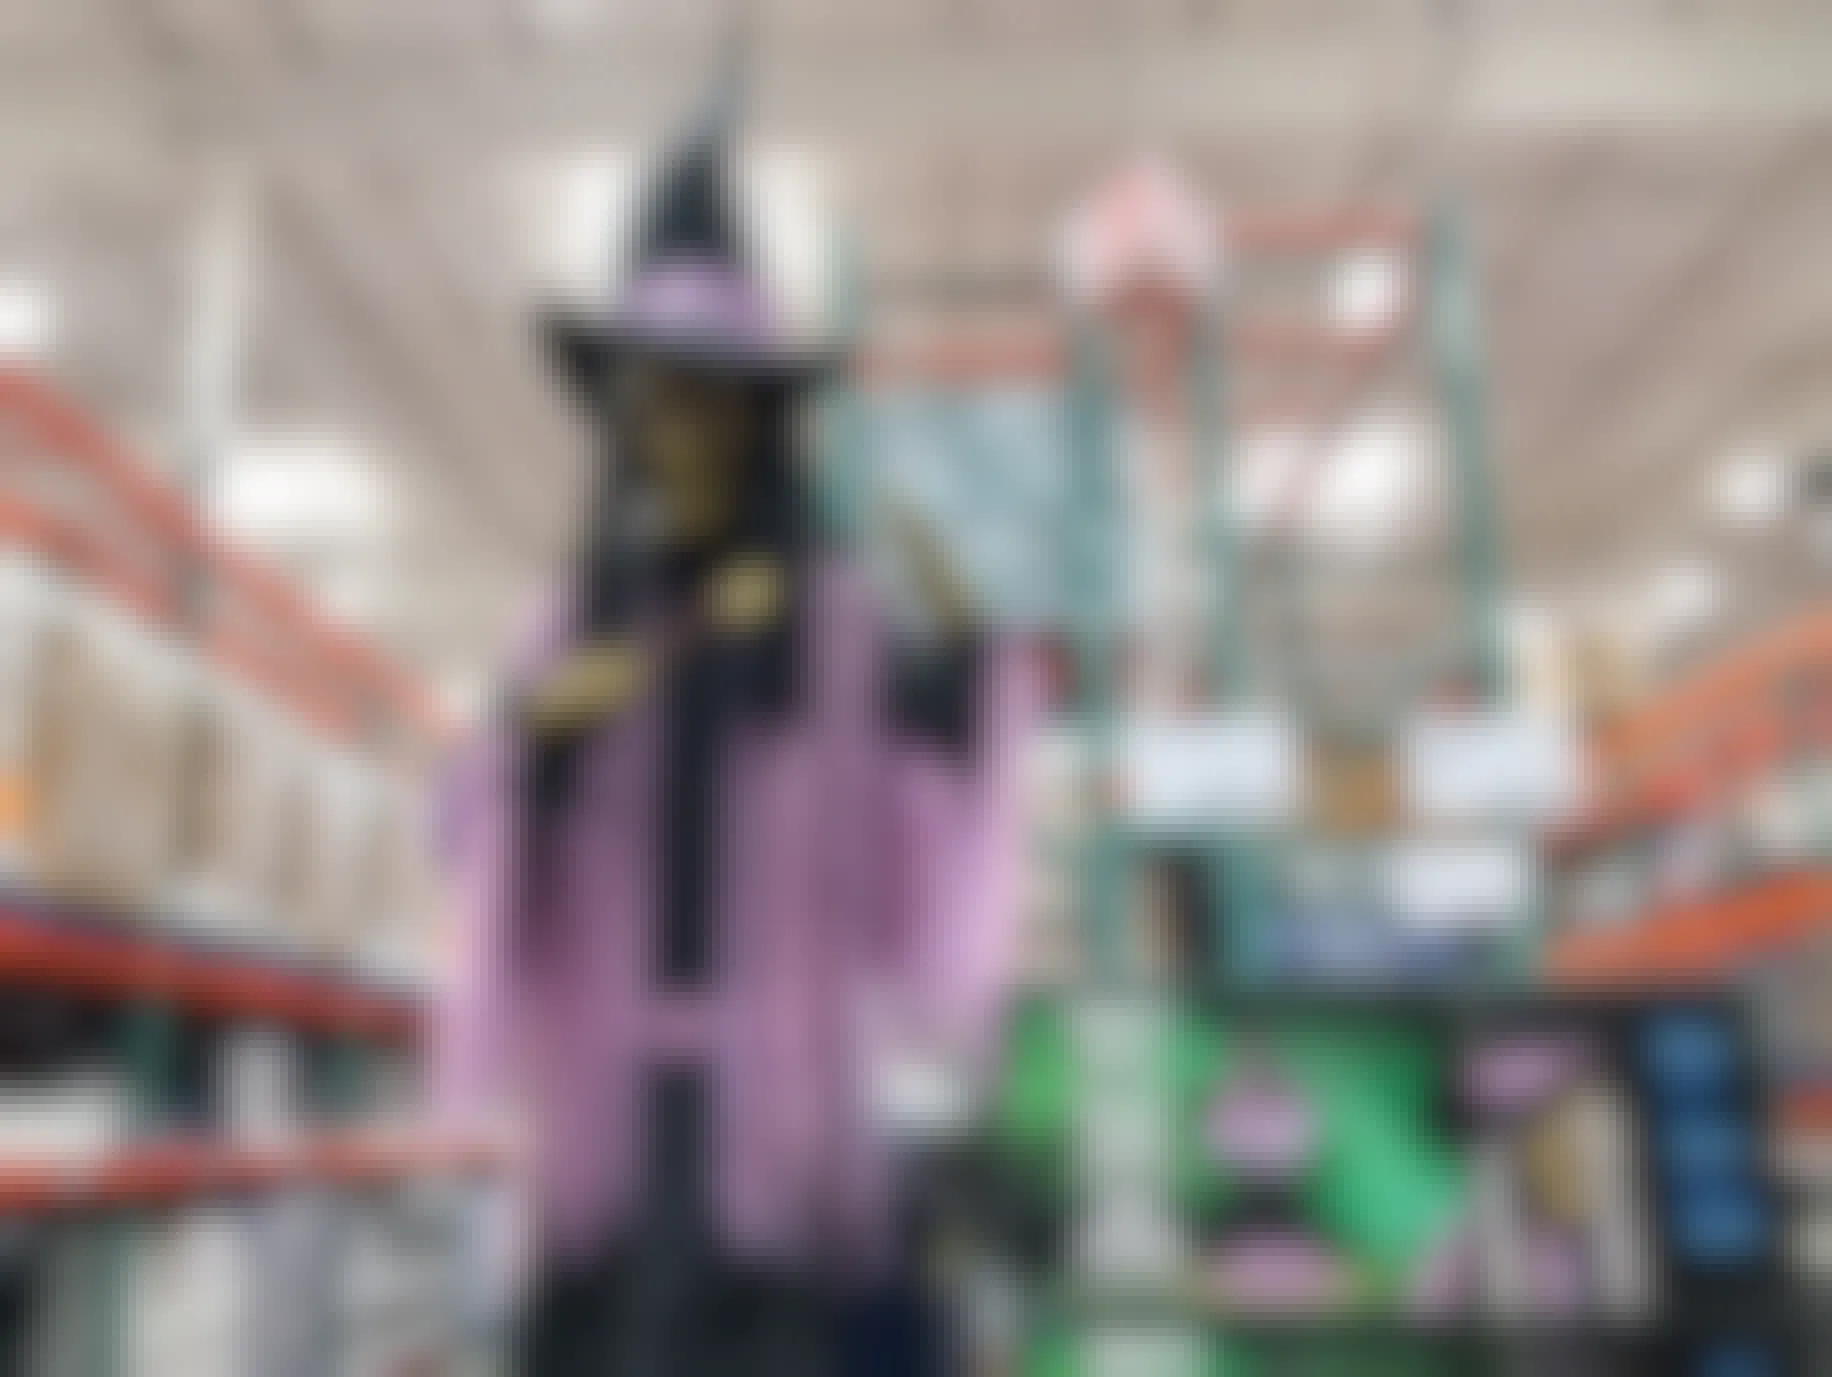 An animated witch Halloween decoration for sale at Costco